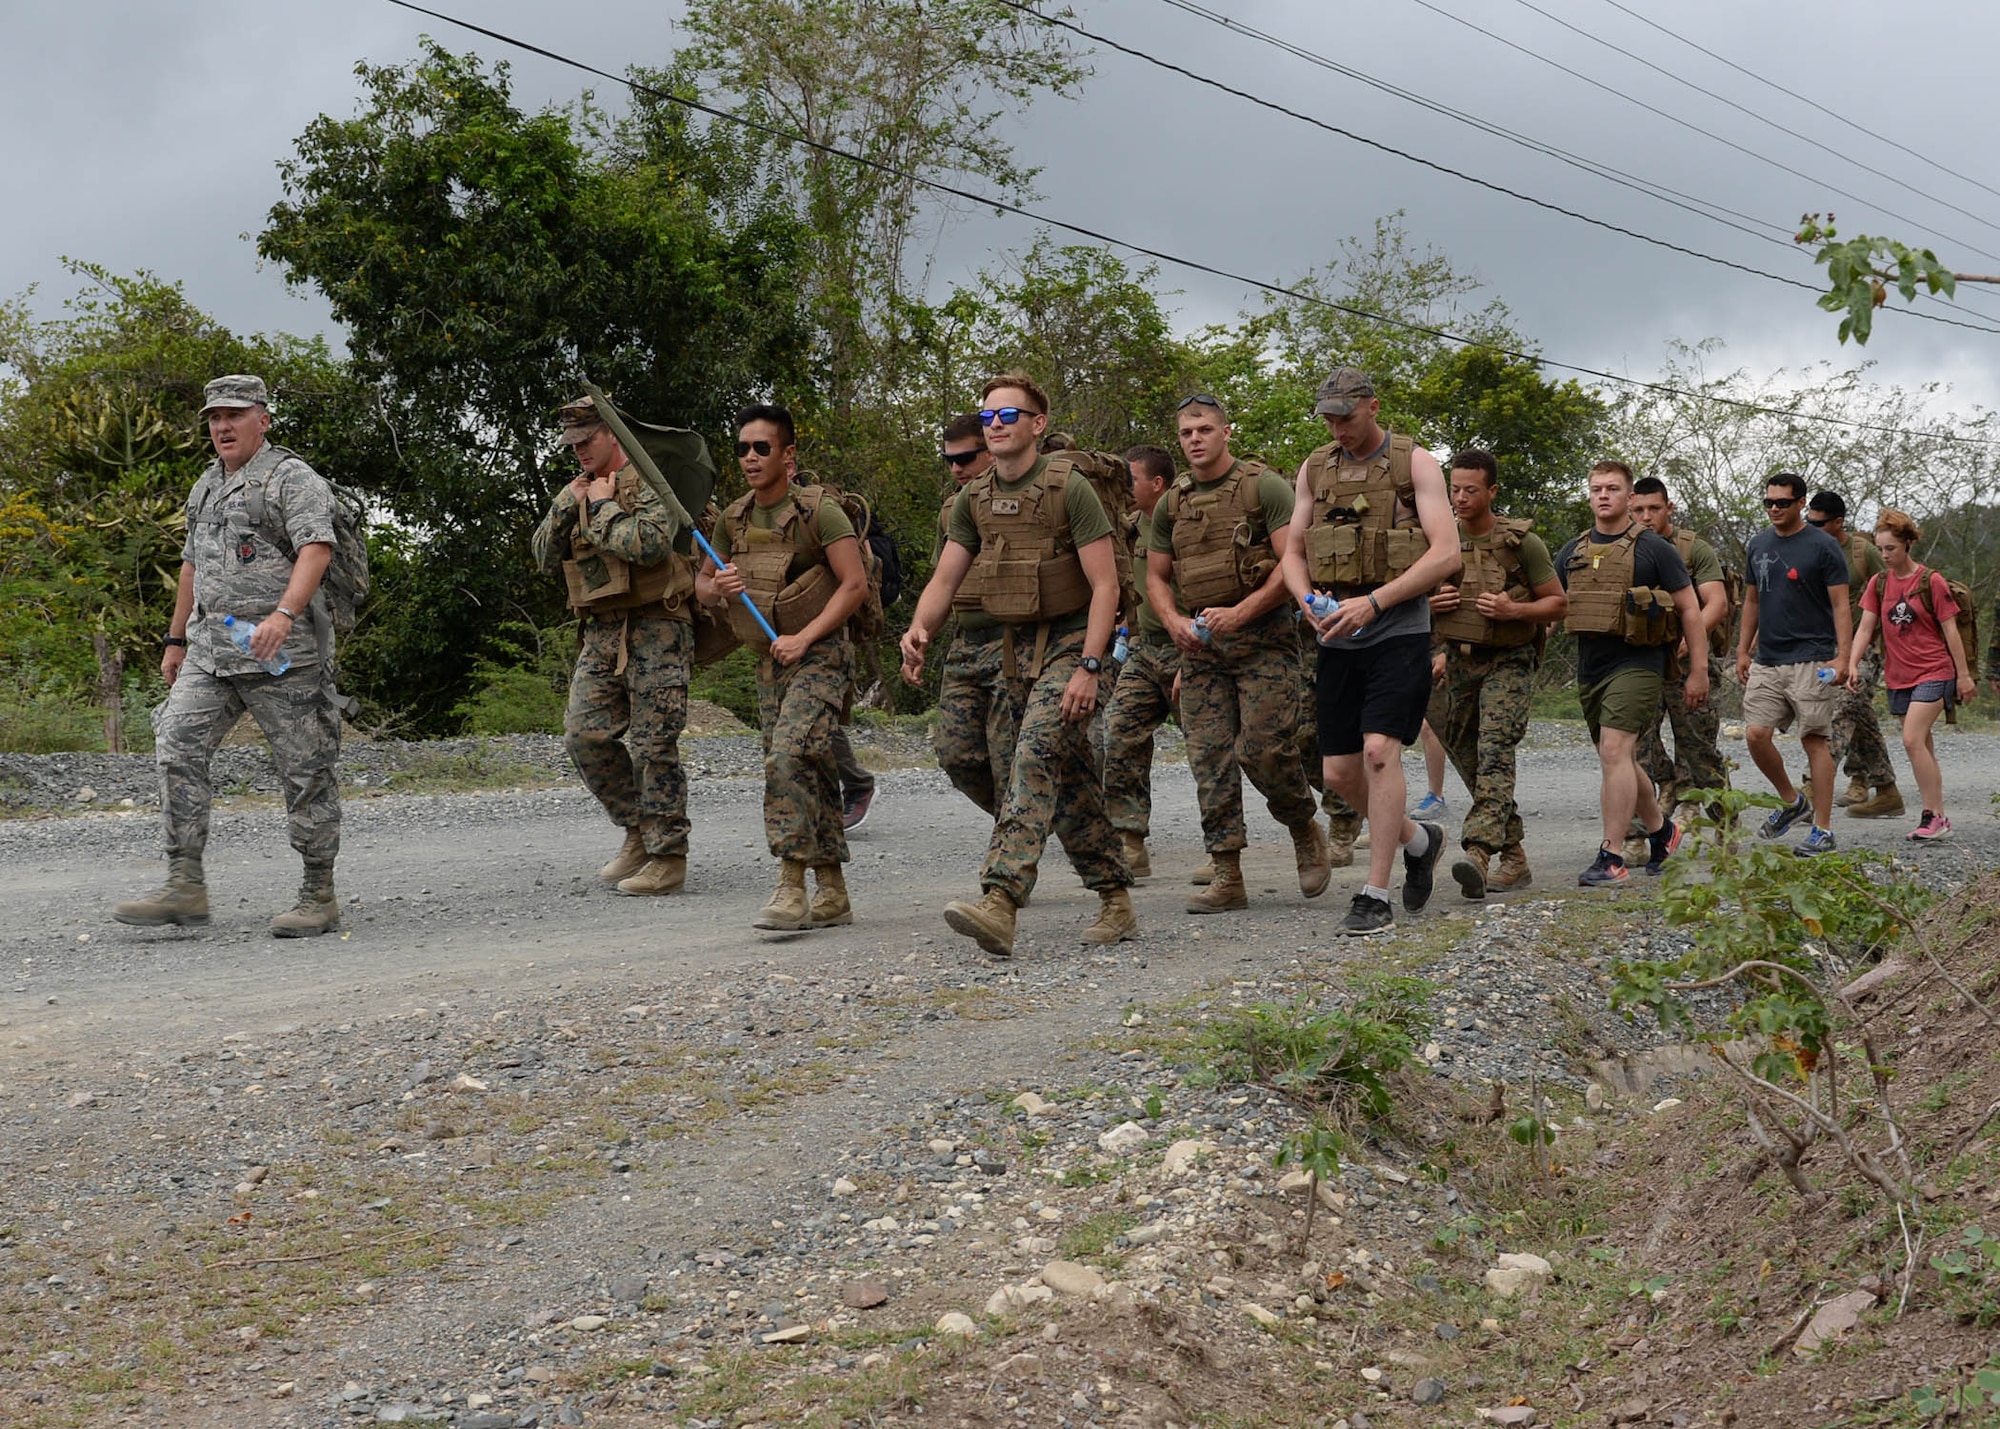 U.S. Air Force Col. Michael Weymeyer, the 346th Air Expeditionary Group commander, leads a group of U.S. service members on a march uphill while participating in the Sexual Assault Prevention and Response 5K Ruck March in Arroyo Cano, Dominican Republic, April 9, 2017. Both men and women can be victims of sexual assault, and there are support services and reporting options available for all victims, regardless of their situation. (U.S. Air Force photo by Staff Sgt. Timothy M. Young)